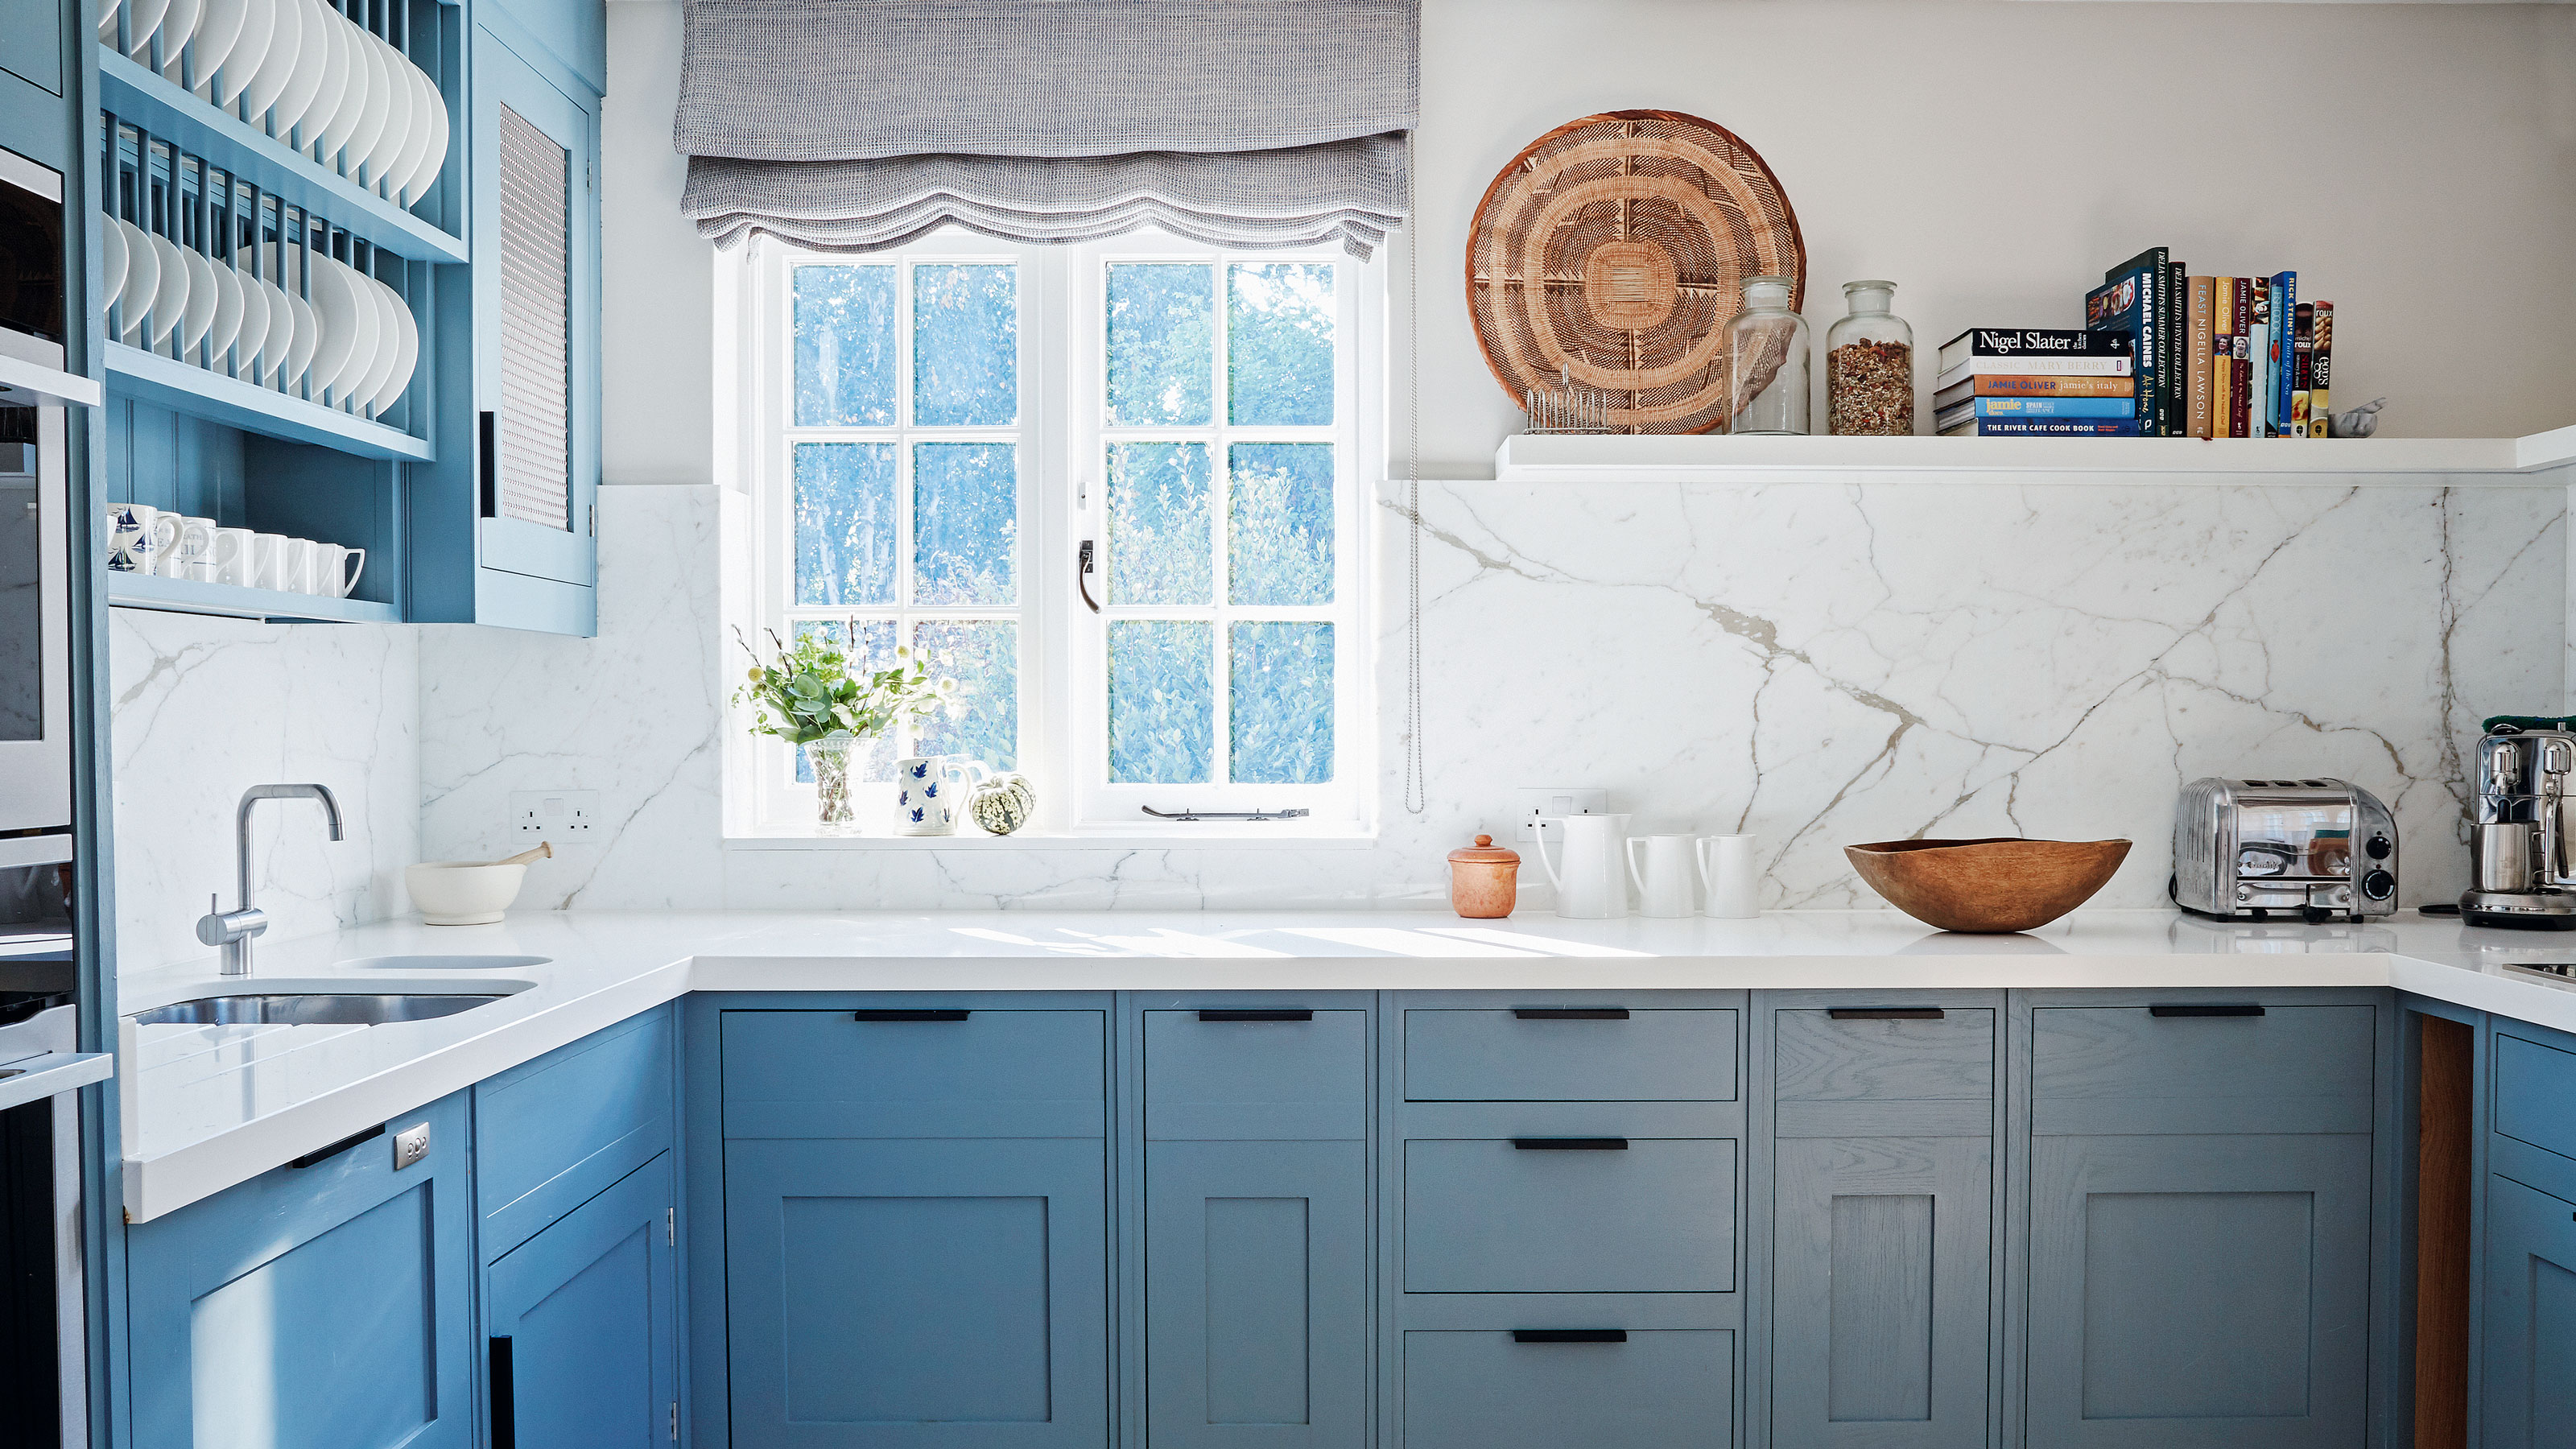 The Best Cleaning Products For Your Kitchen, Bedroom, Bathroom + Those  Nooks & Crannies